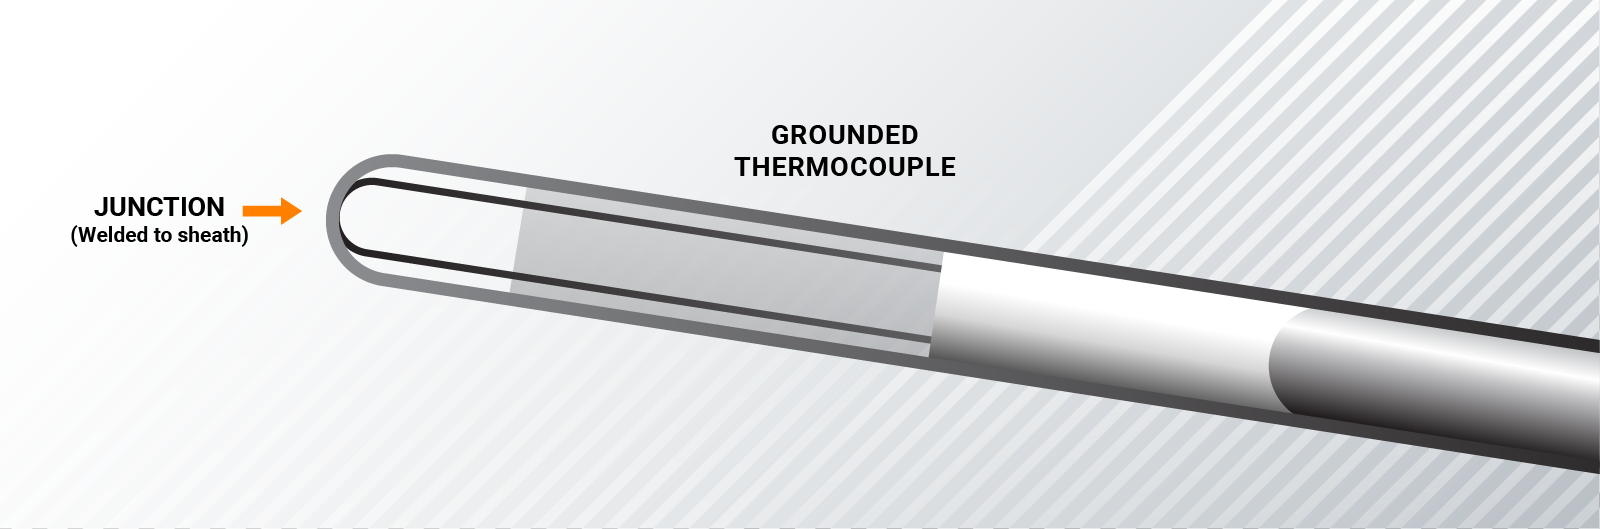 Grounded Thermocouple Diagram